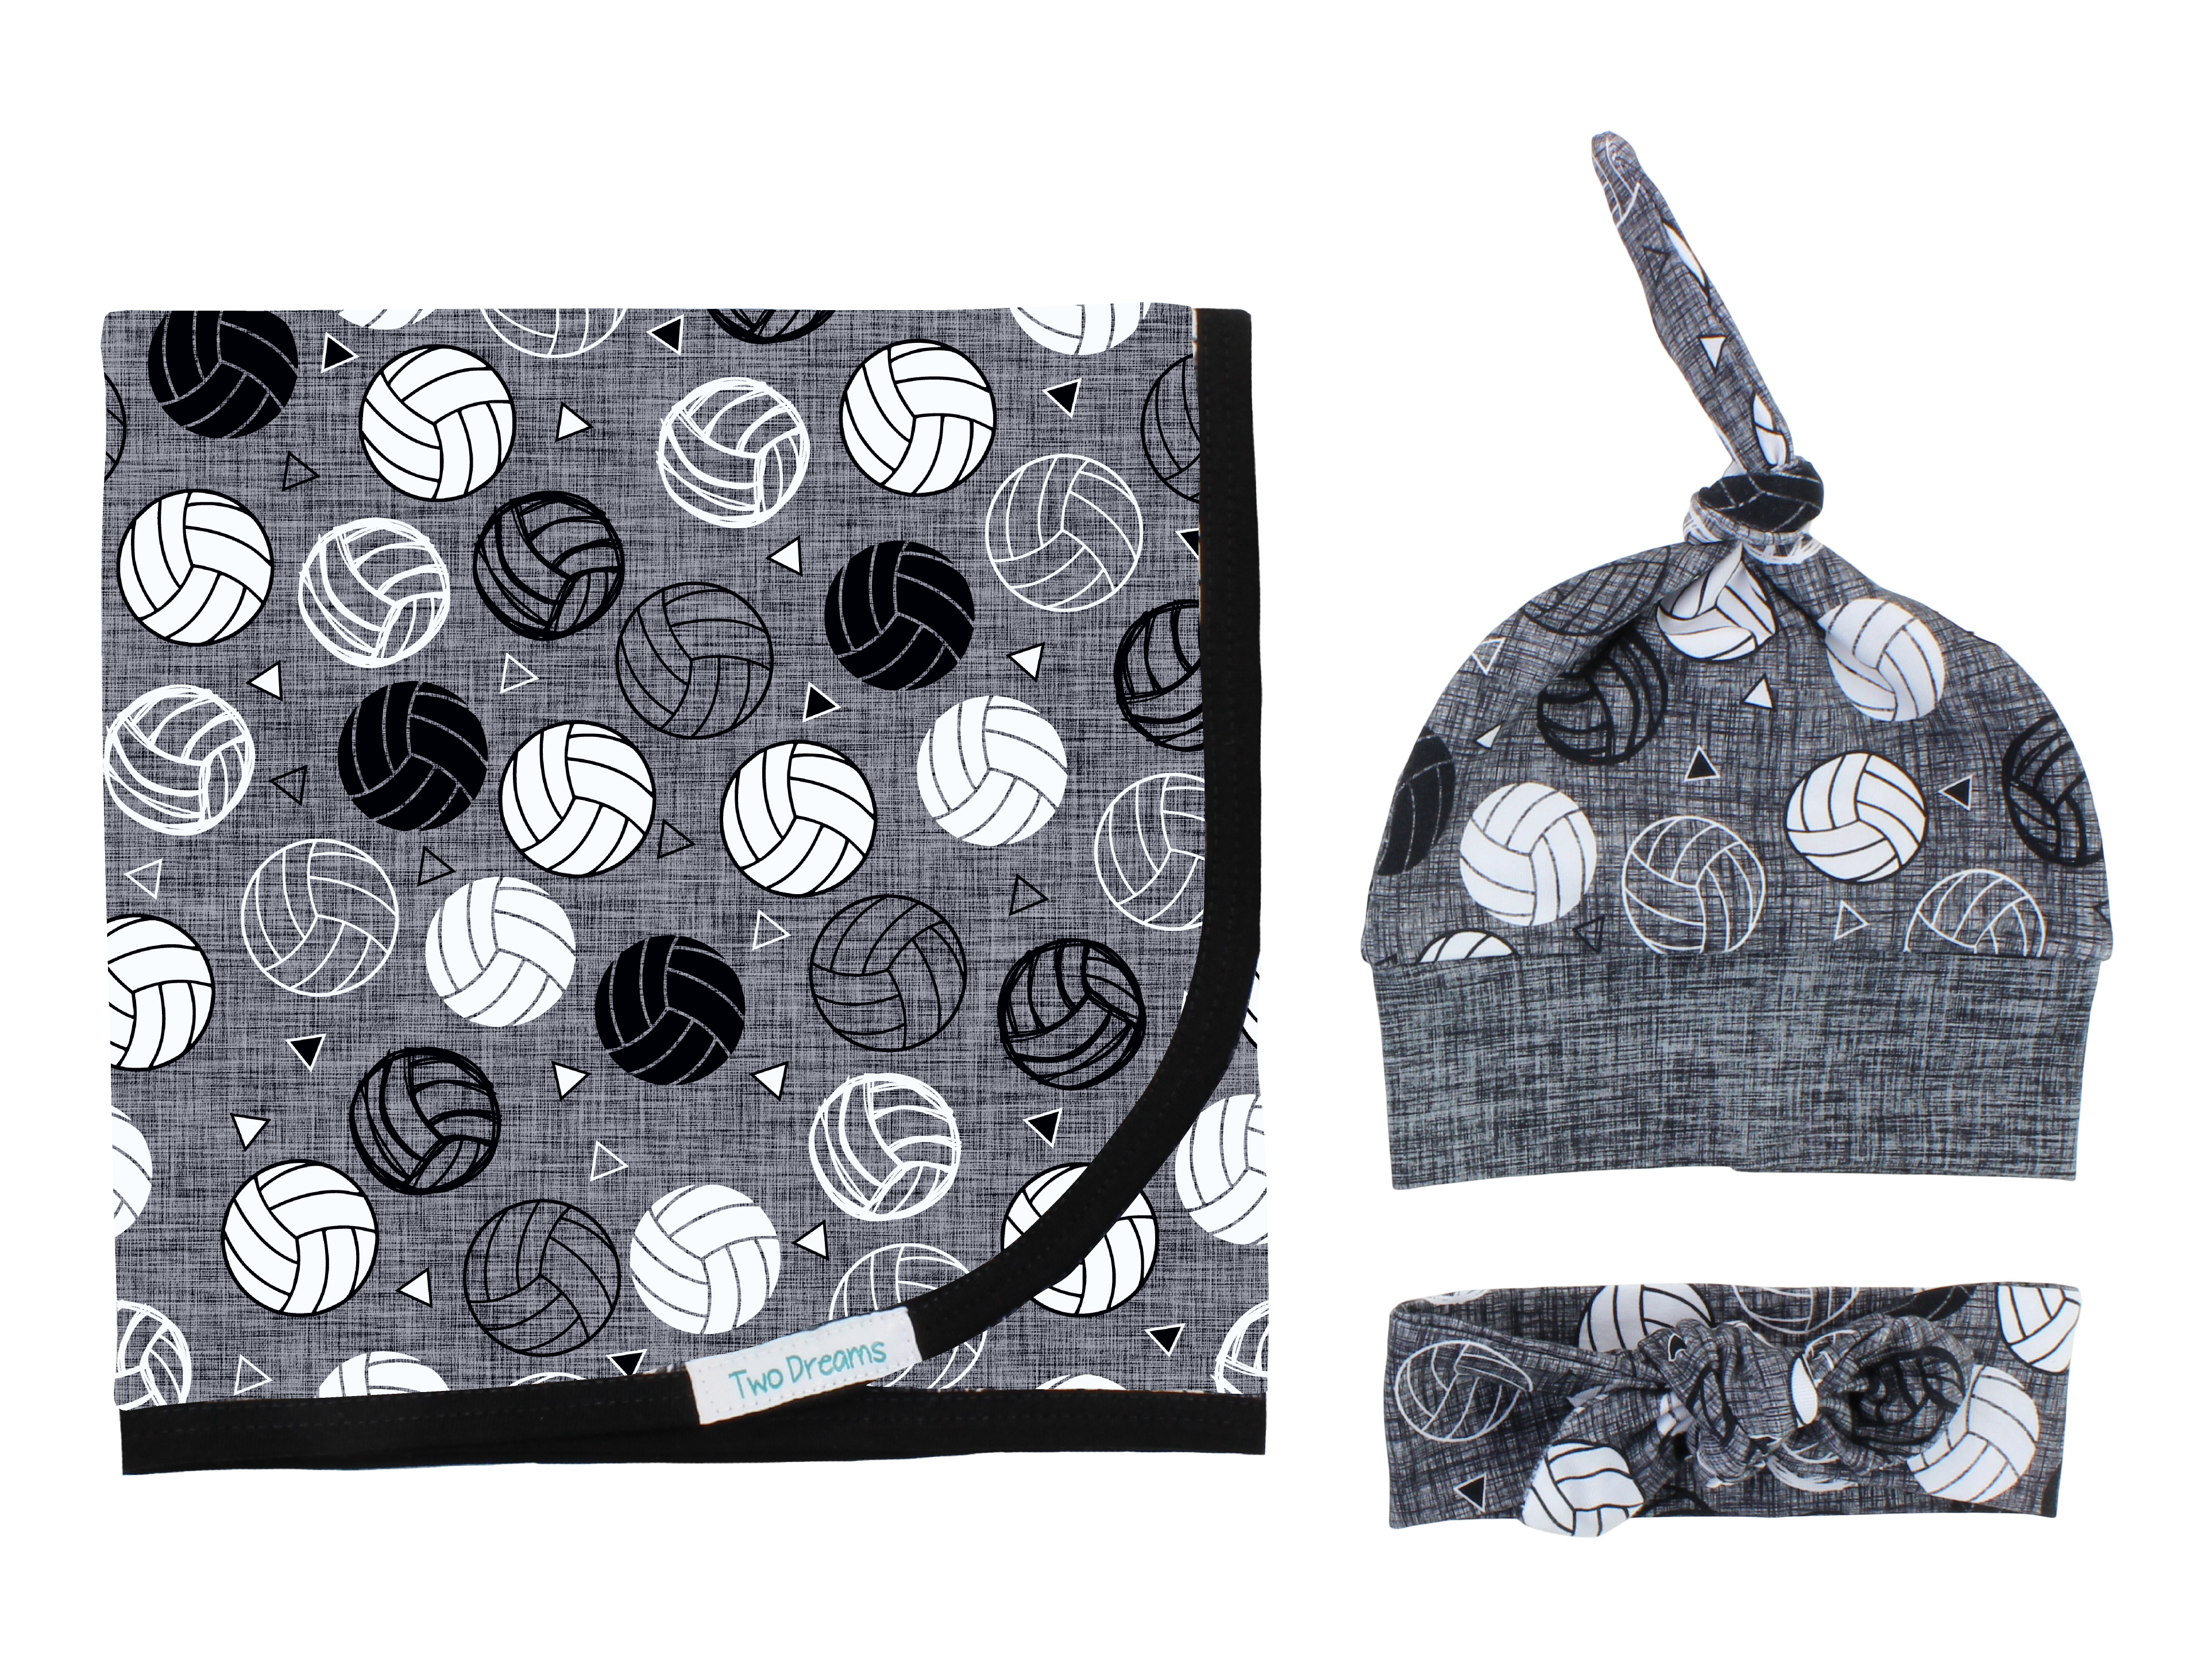 Volleyball Swaddle Set- Other Fabric Choices Available